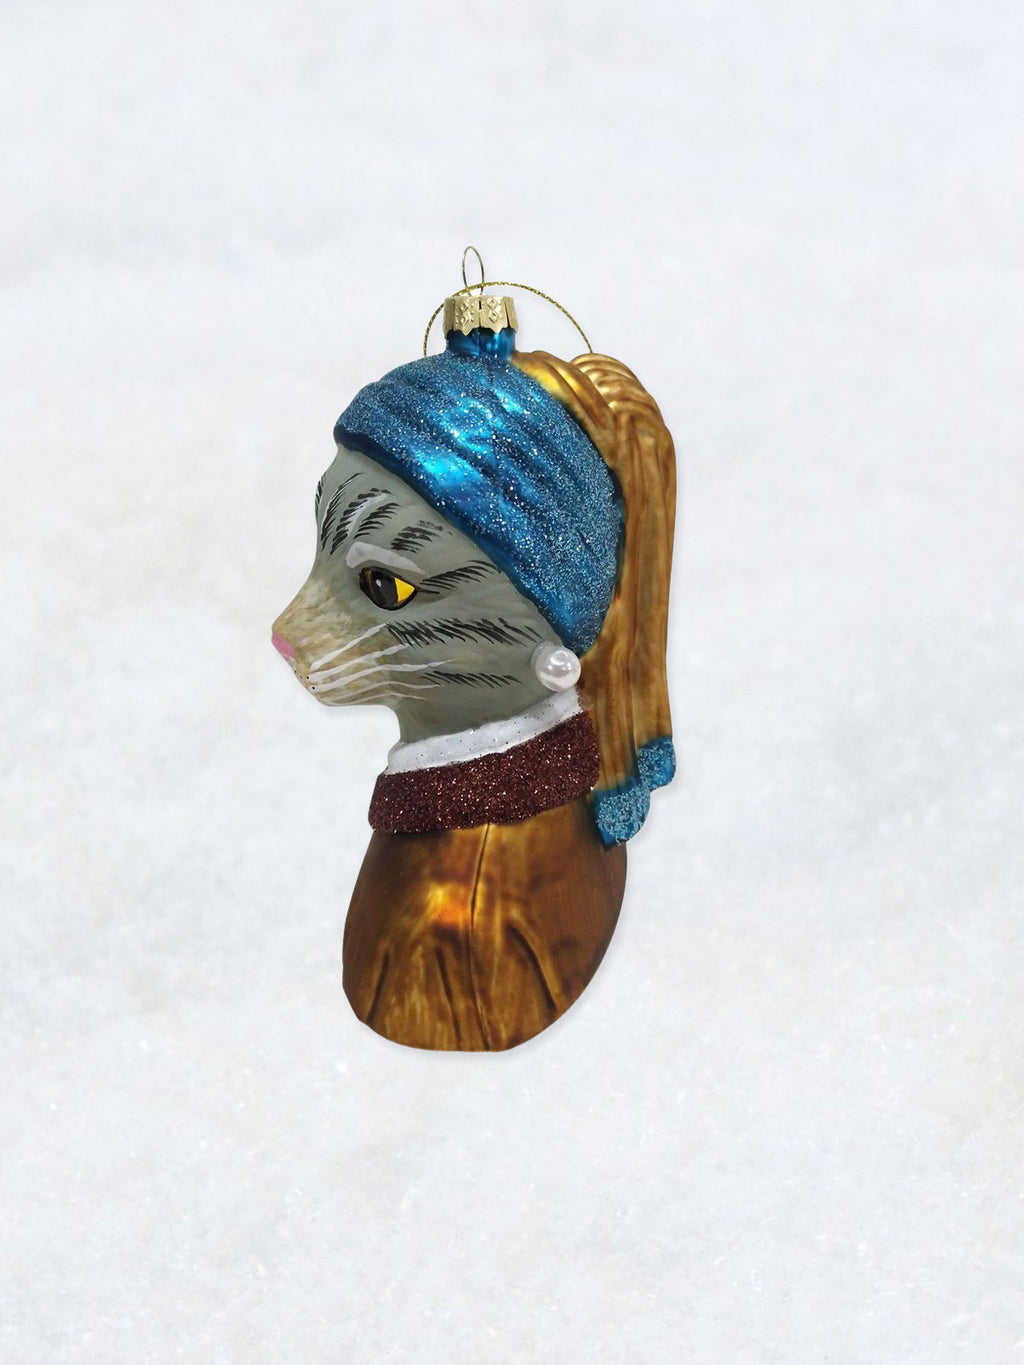 Christmas Ornament - Tabby Cat with a Pearl Earring